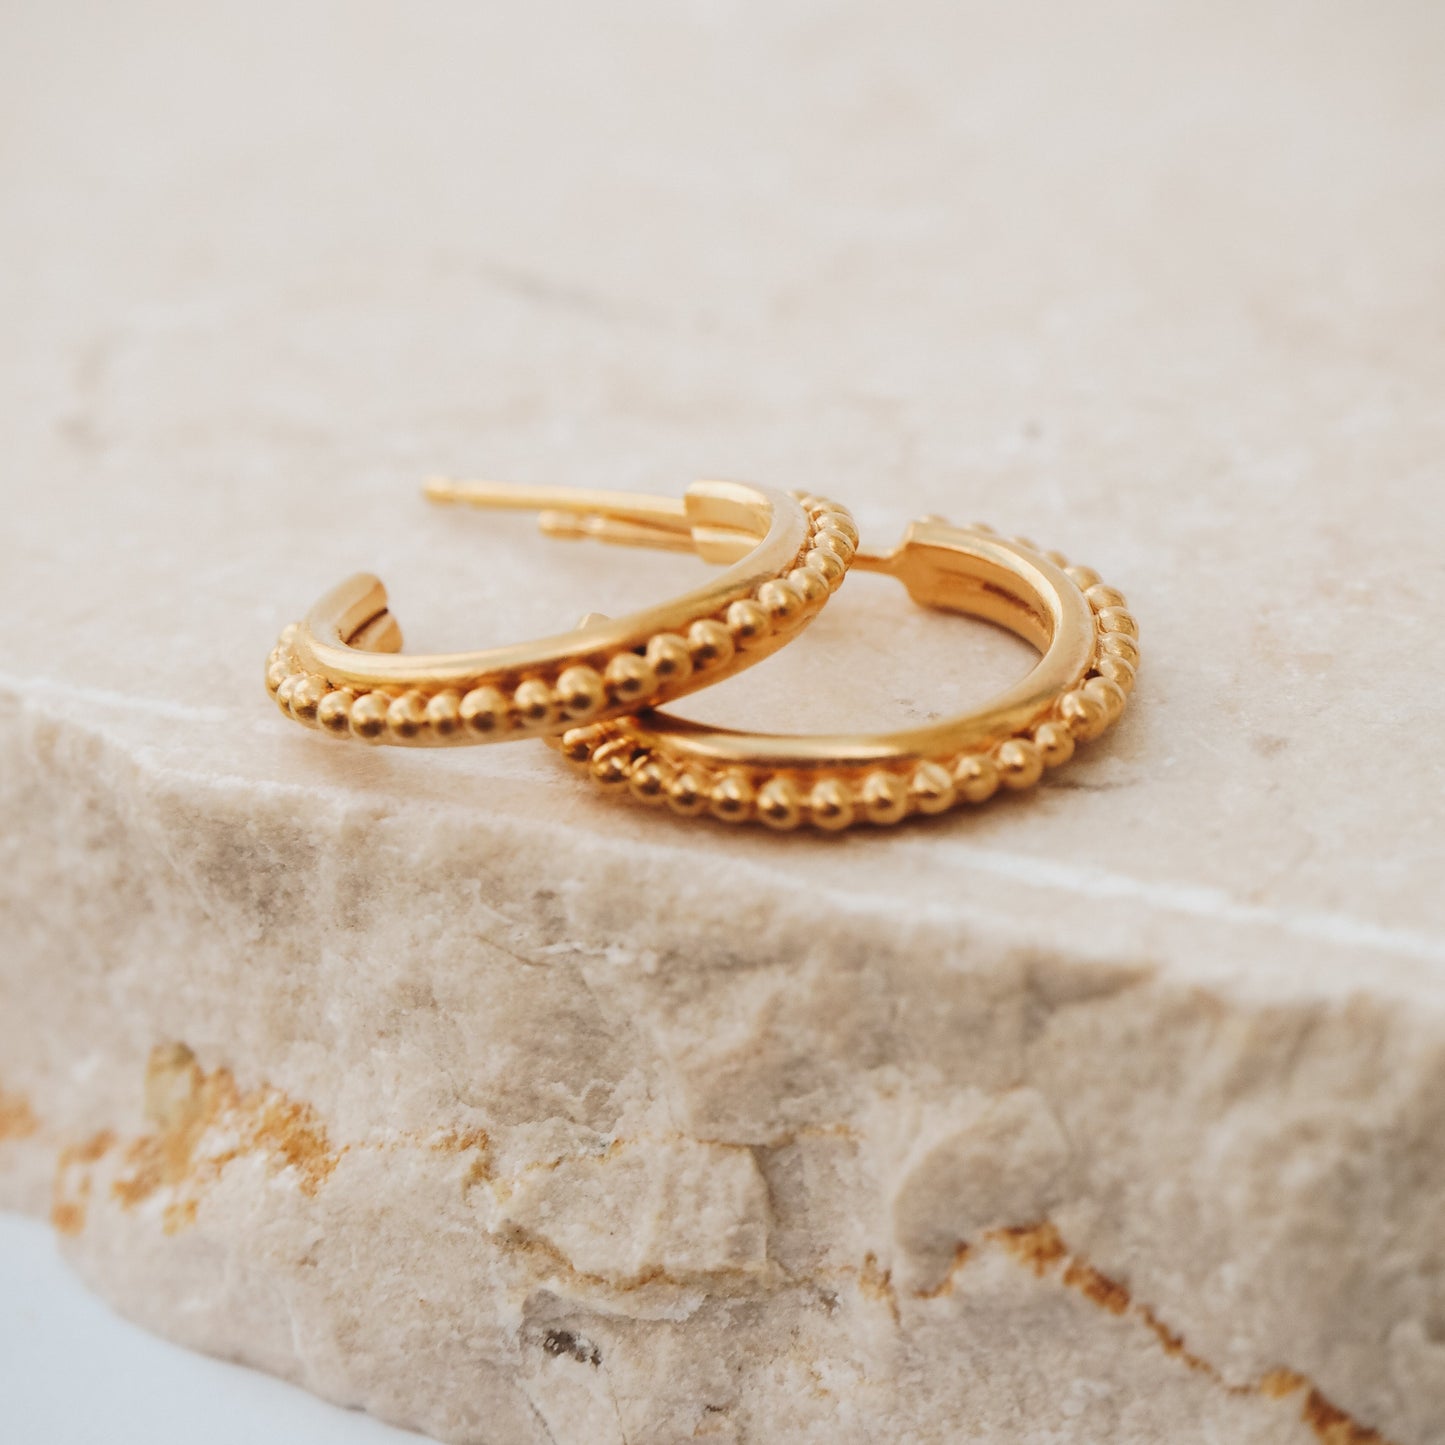 Timeless gold stud hoop earrings featuring granulation detailing, reminiscent of ancient civilisations' jewellery.